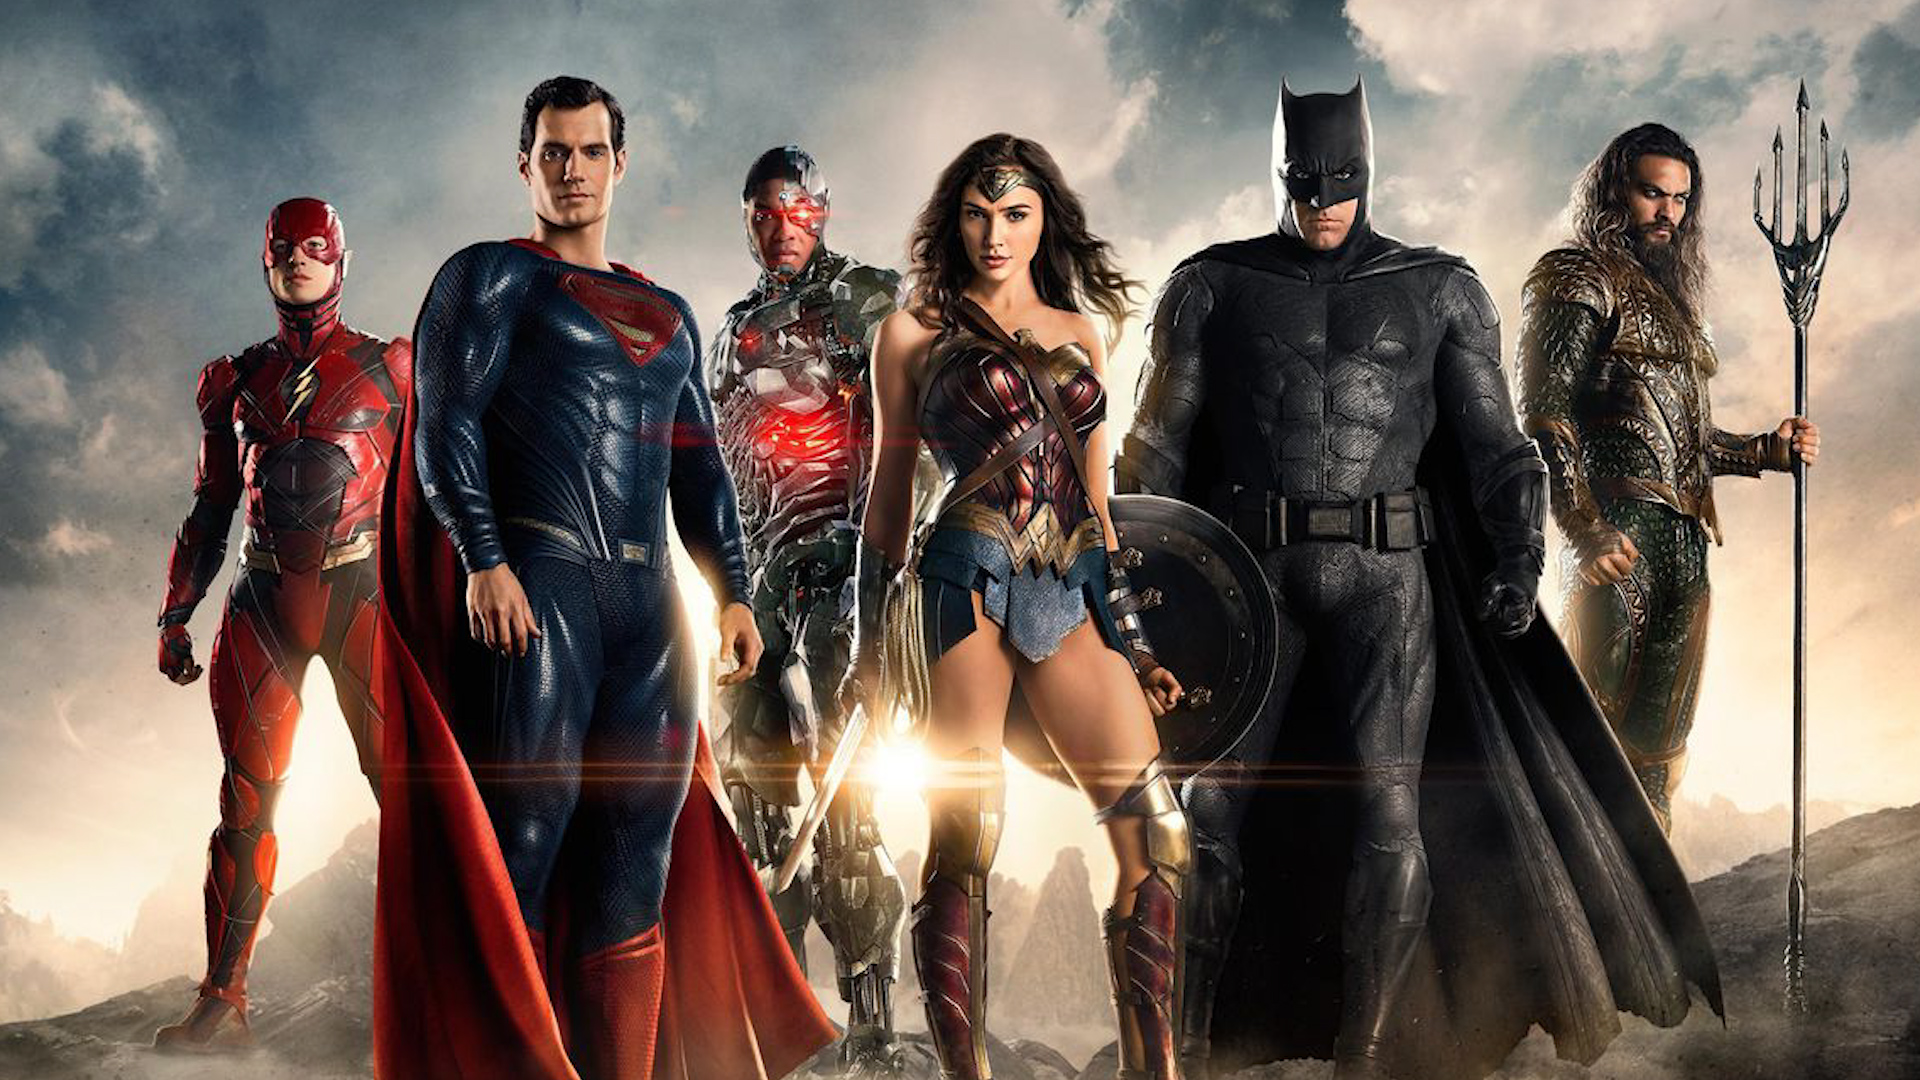 Joss Whedon addresses the Justice League situation, claims Warner Bros.  lost faith in Zack Snyder's vision | GamesRadar+